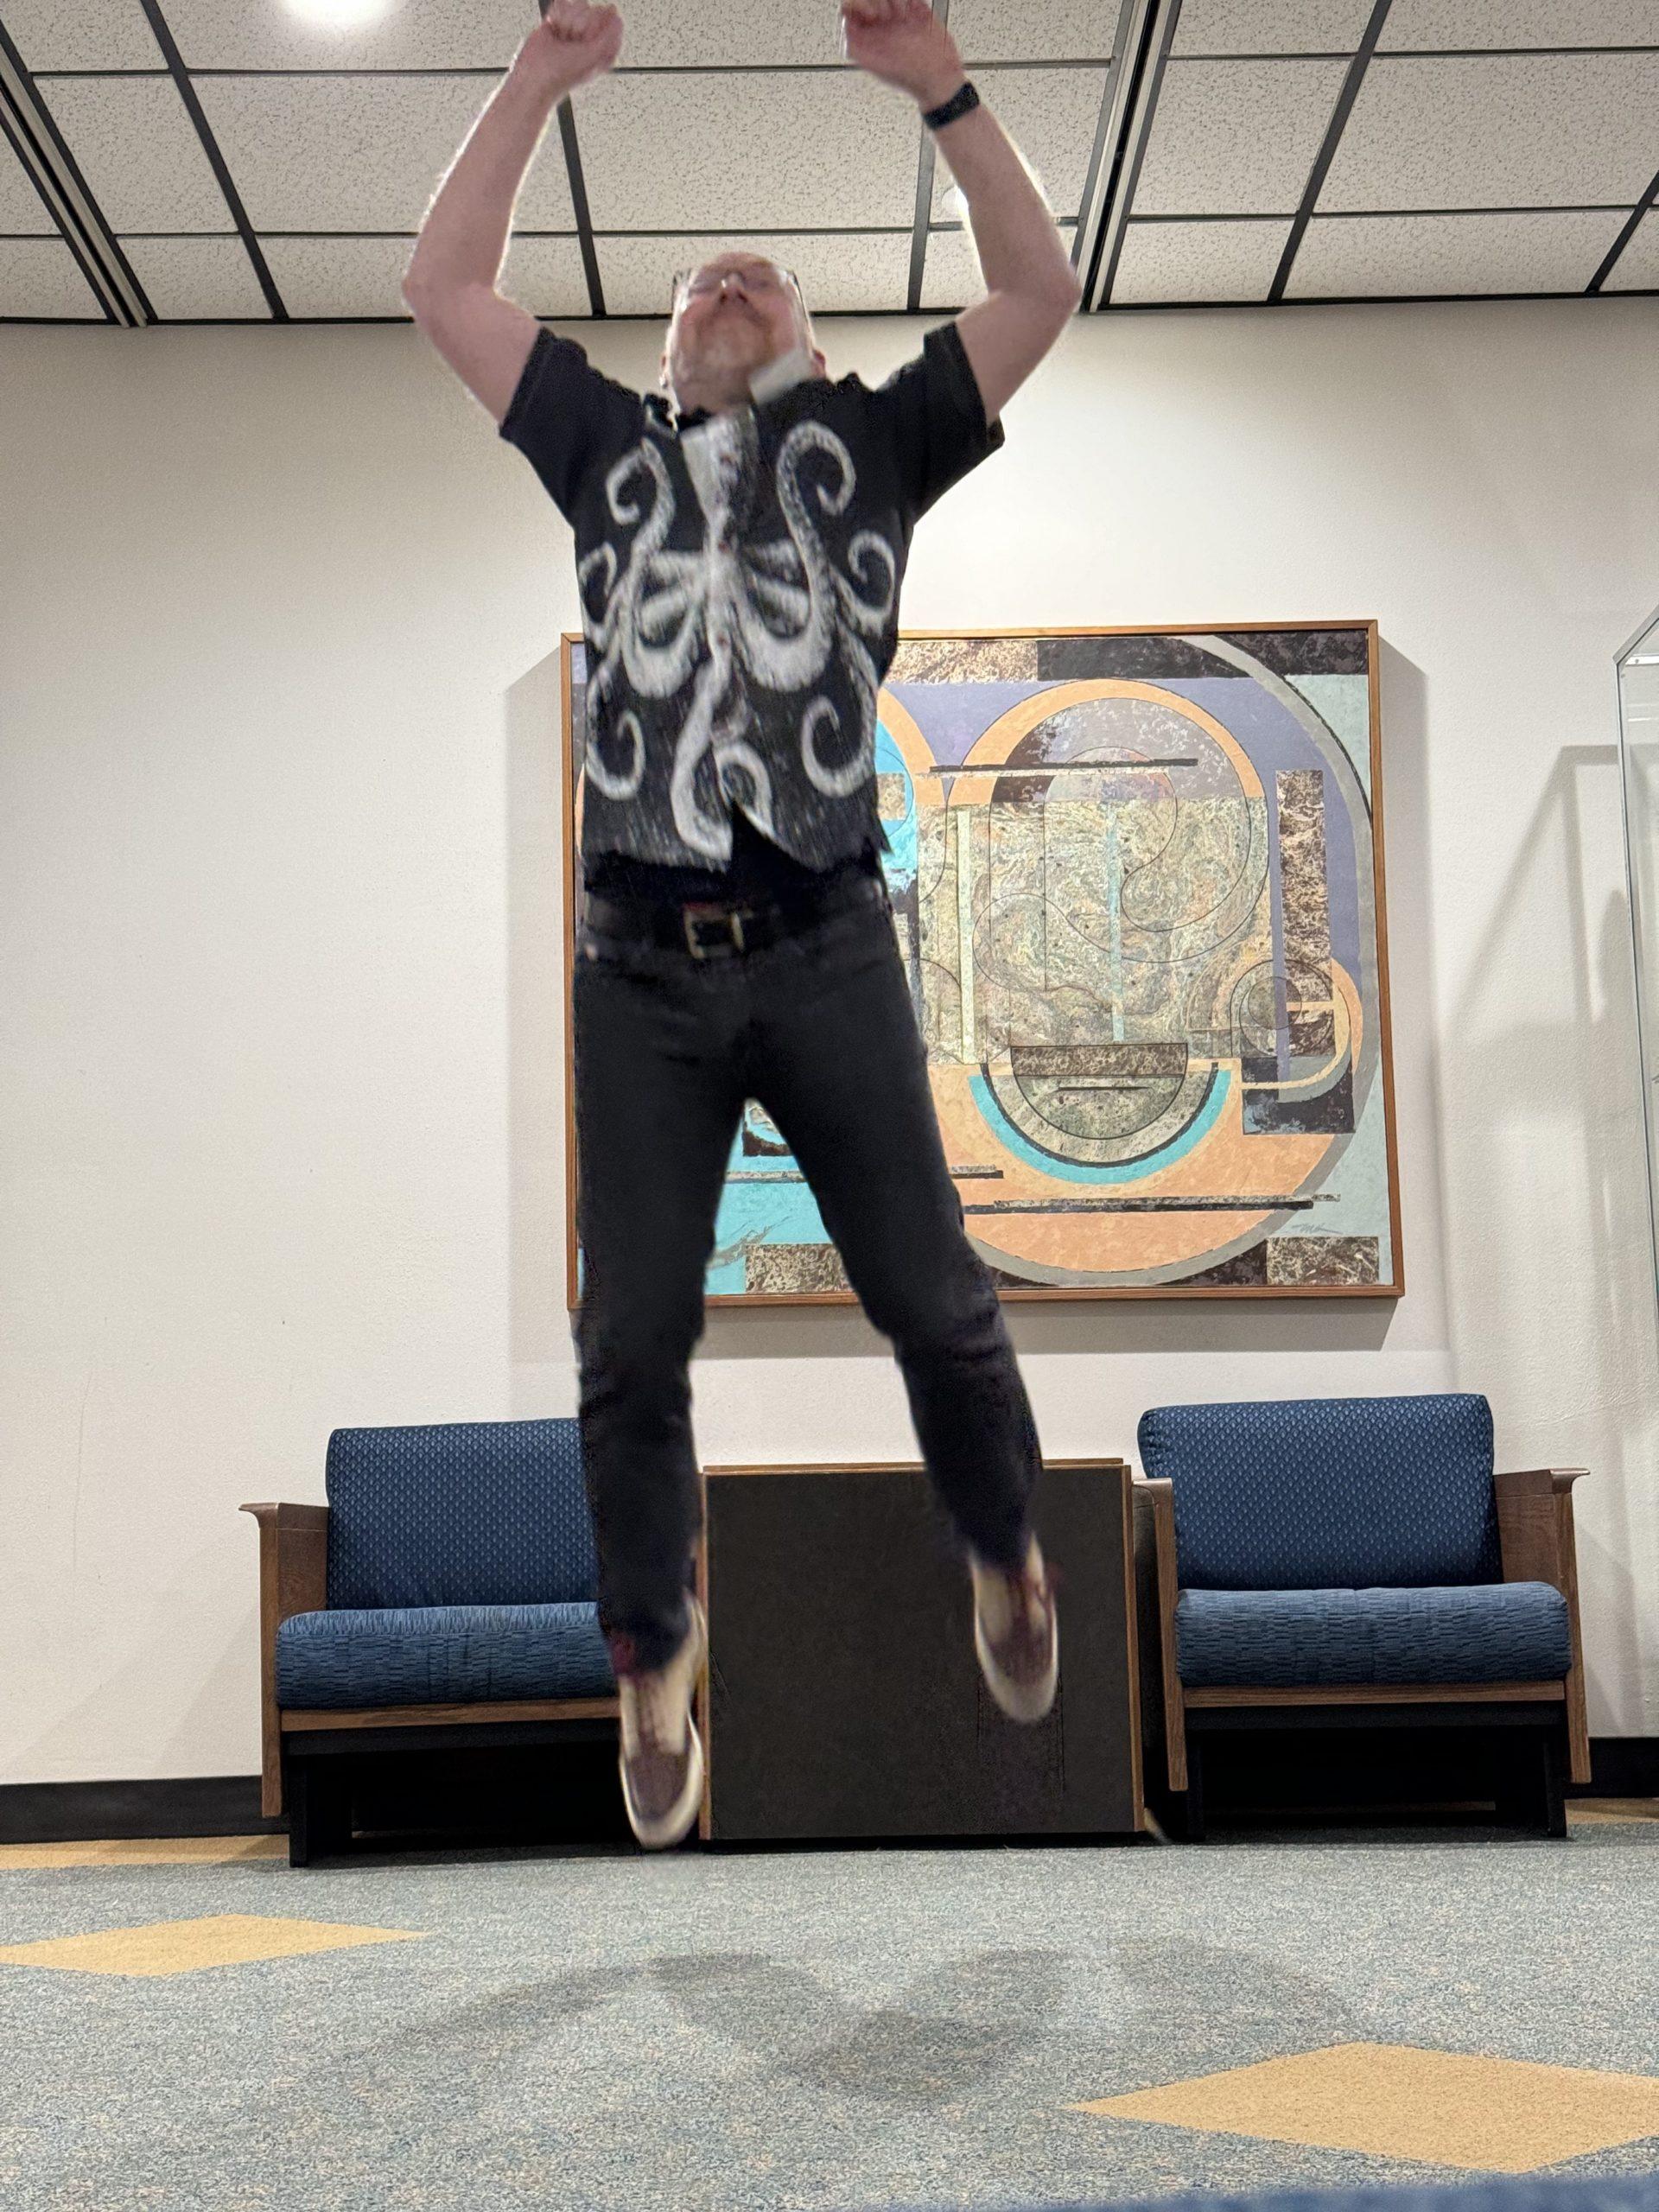 Me, wearing jeans and a shirt with an octopus print, looking quite goofy as I jump into the air with my arms raised above my head.